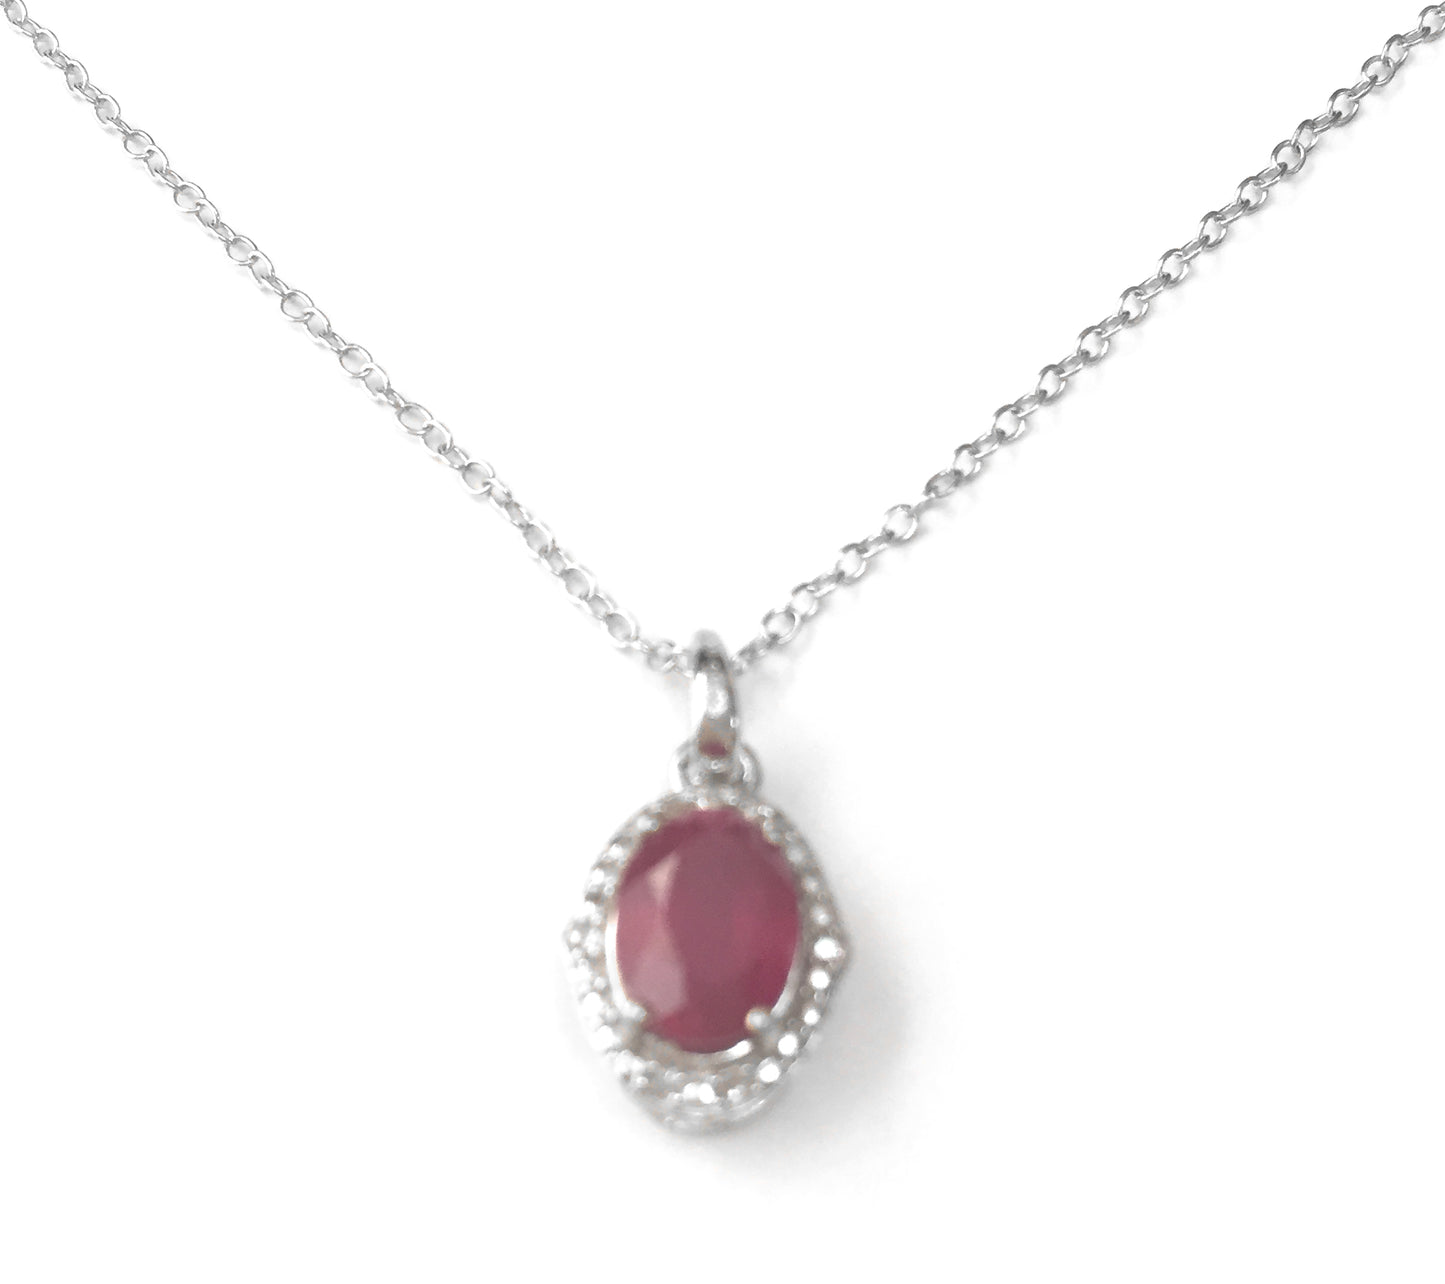 'Maria' Ruby & Diamond Sterling Silver Necklace, A magnificent and majestic piece, designed with 1.750 carats of ruby, the gem of choice for royalty; surrounded by 0.040 carats of diamonds, exquisitely placed on a pure sterling silver chain  